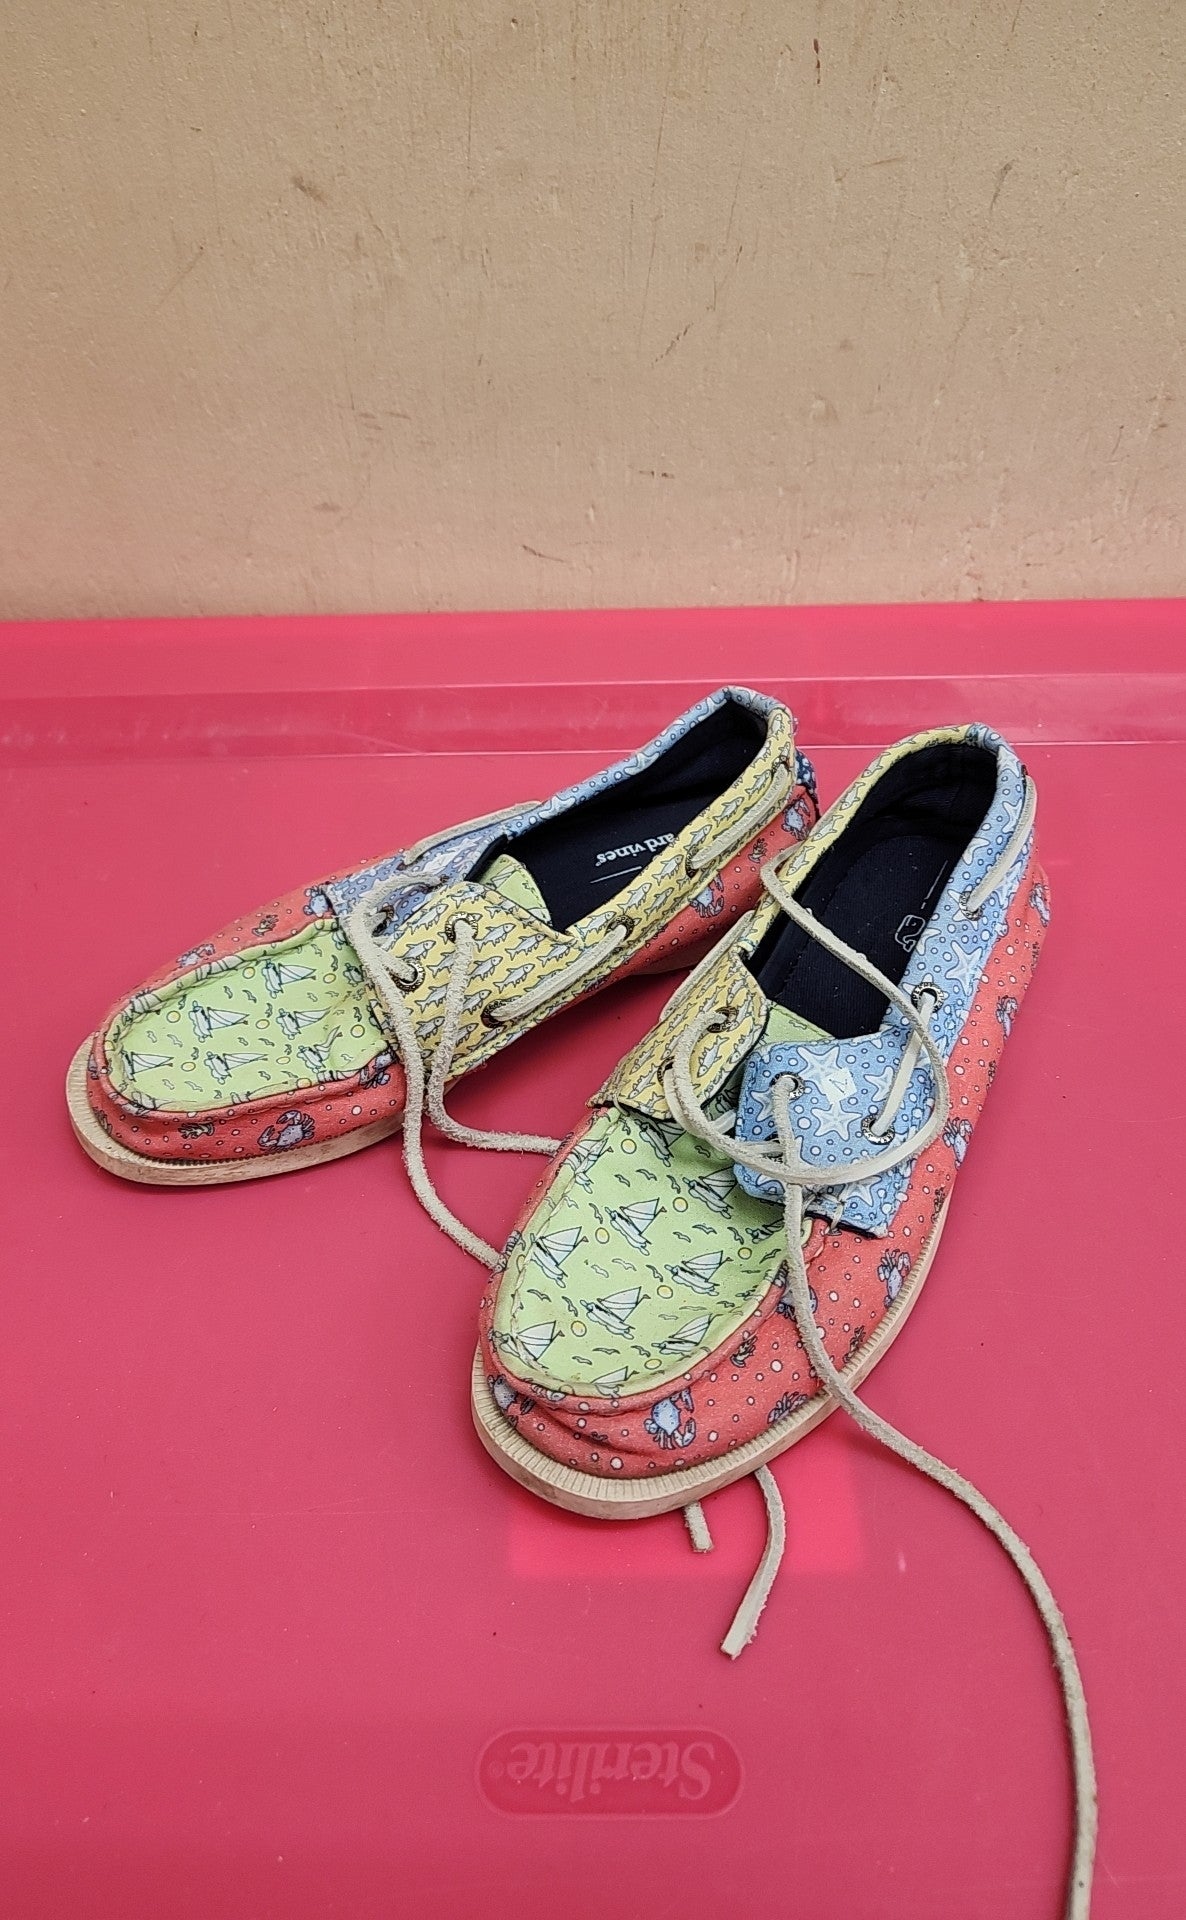 Sperry Girl's Size 2 Multi Shoes